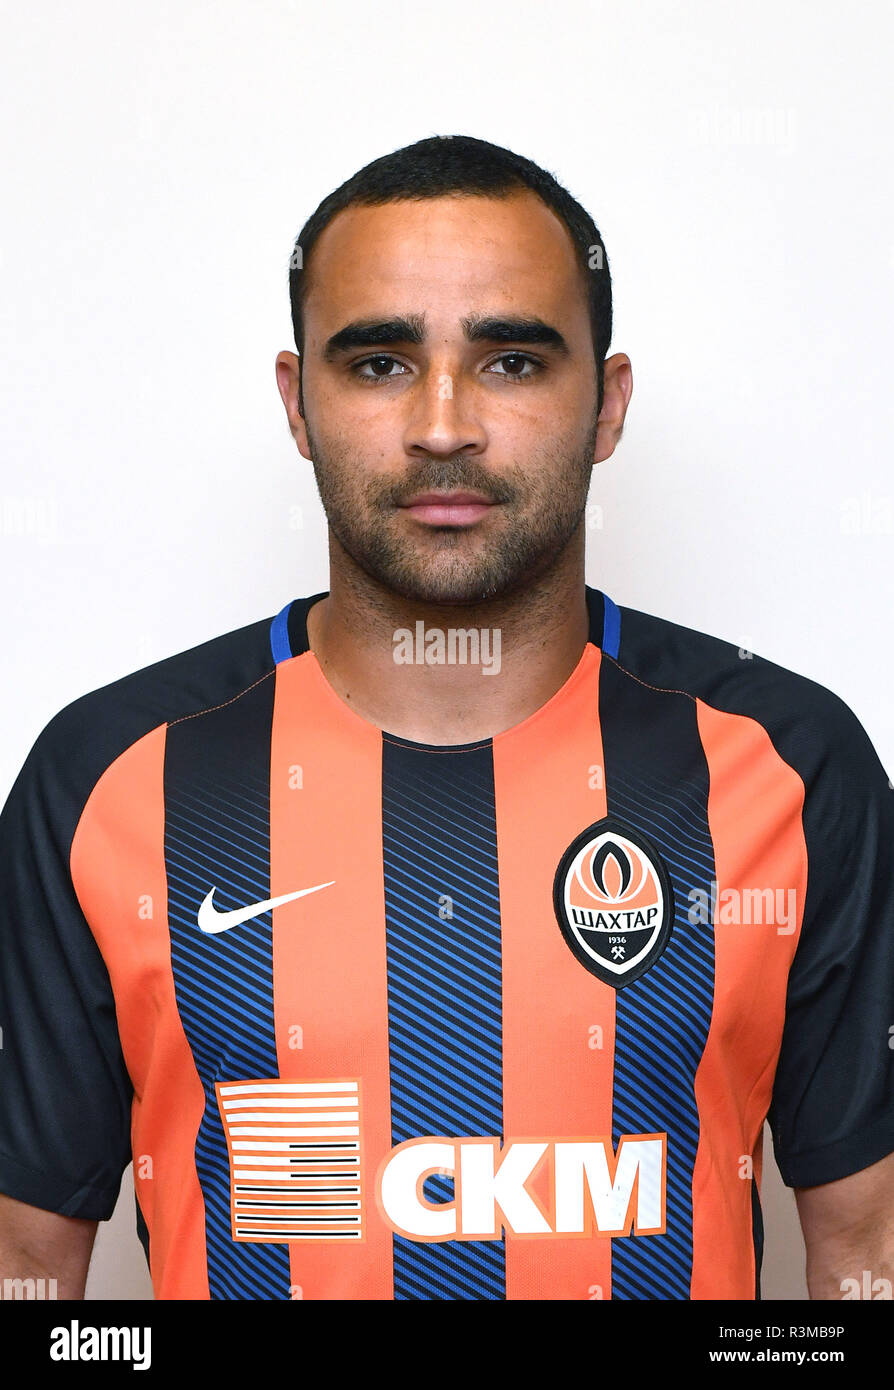 Ismaily  Ismaily N31N31, saison 2018/19 le Shakhtar Donetsk Banque D'Images